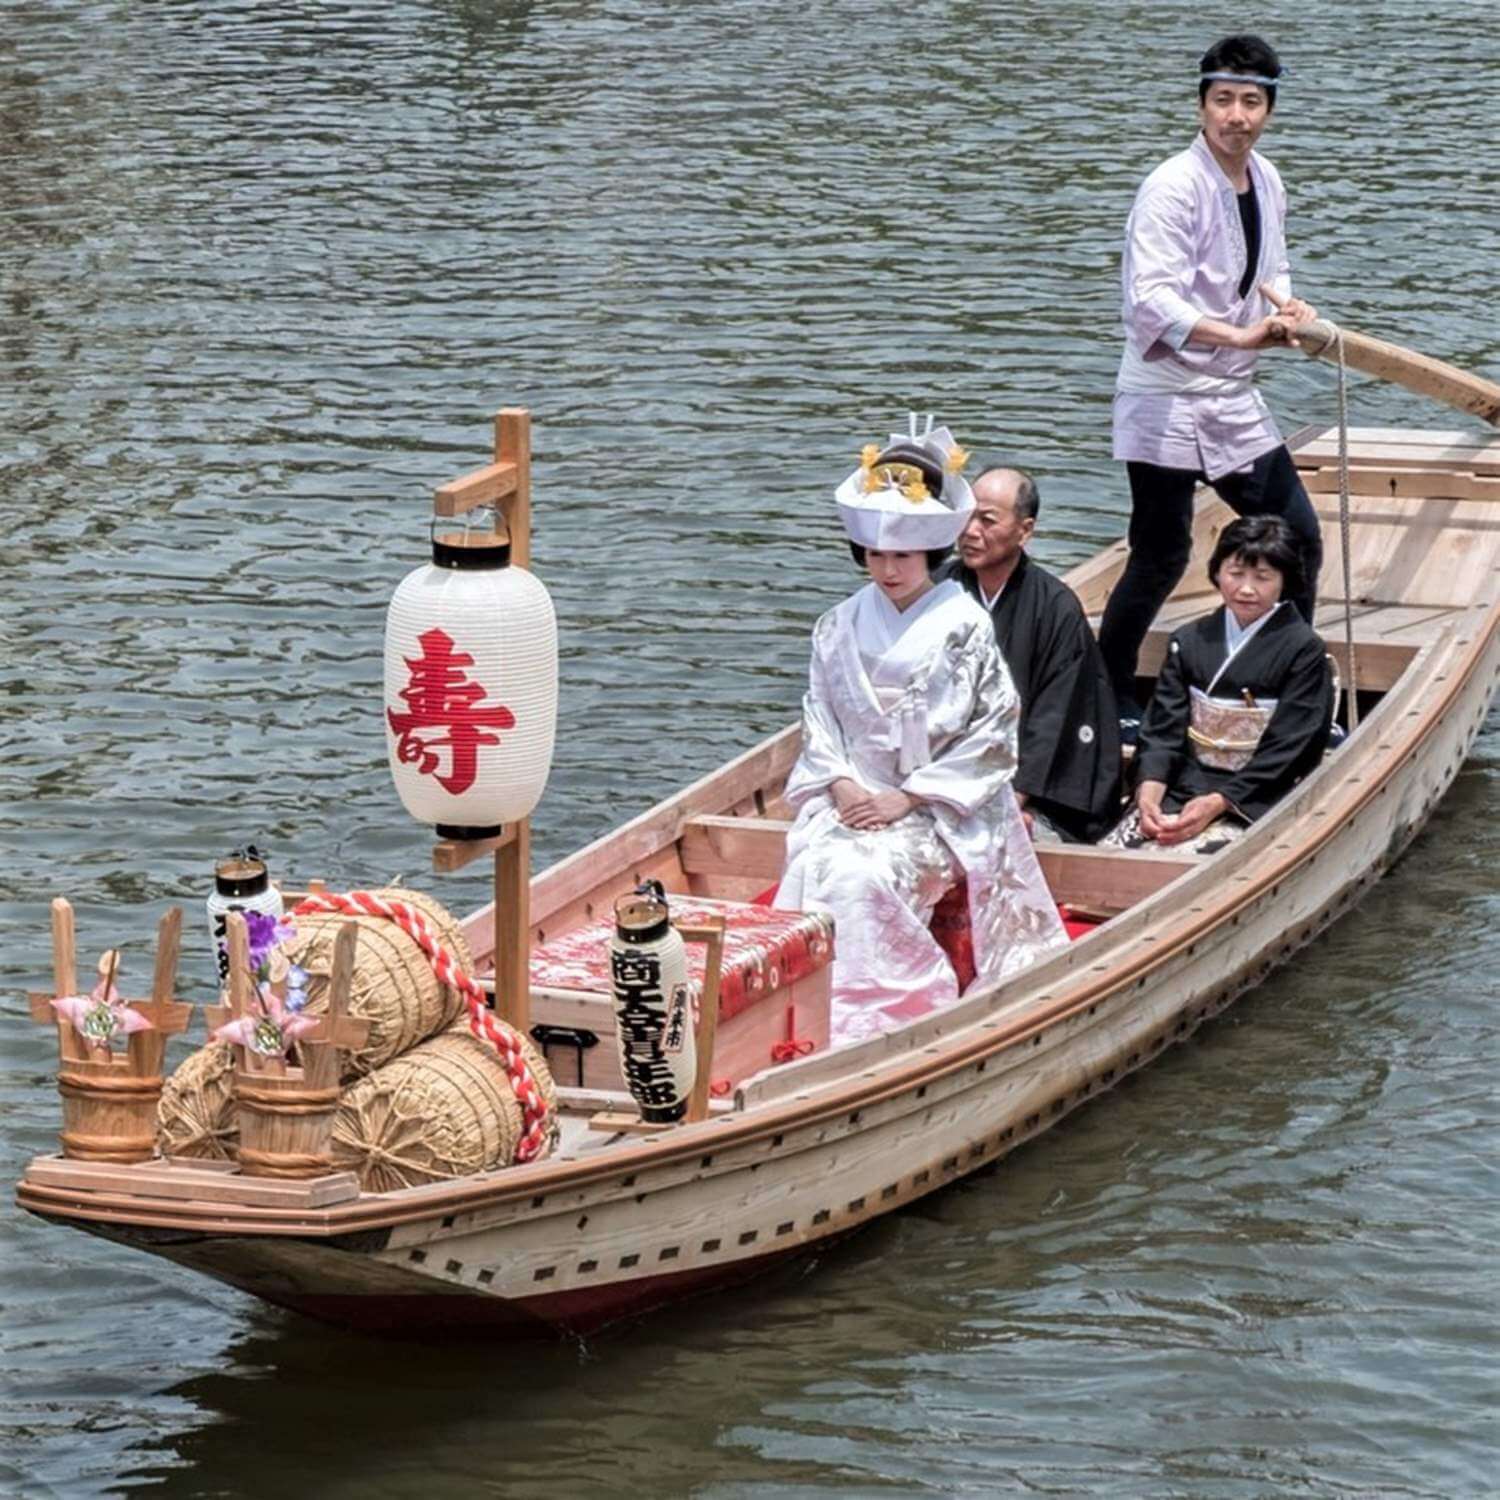 The number has fallen considerably, but in some rural areas, brides may still ride on small boats to wedding venues = Shutterstock